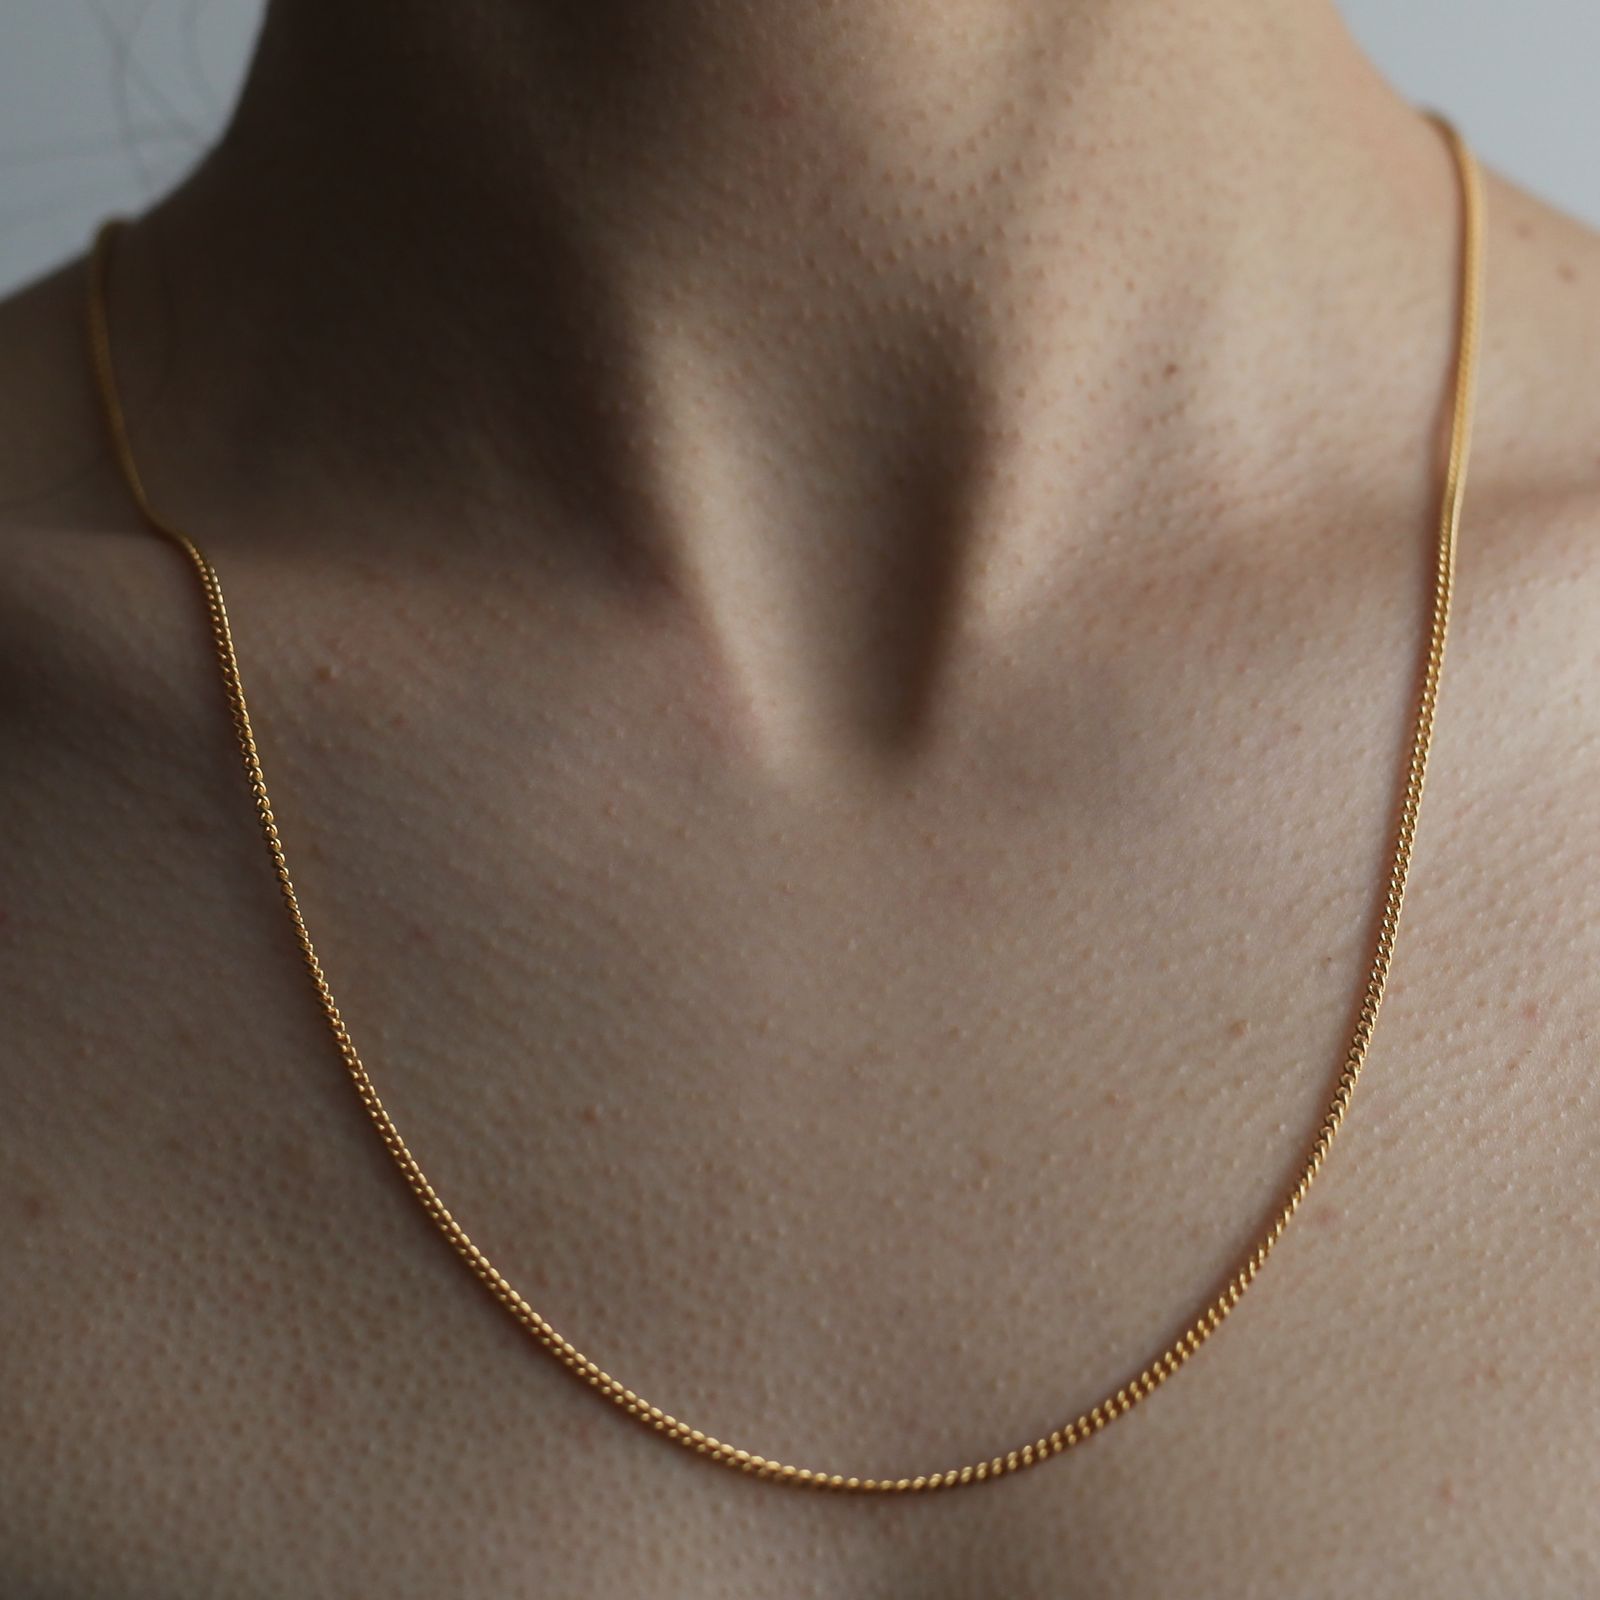 PREEK - 【お取り寄せ注文可能】Unisex Curb Chain Necklace 47 